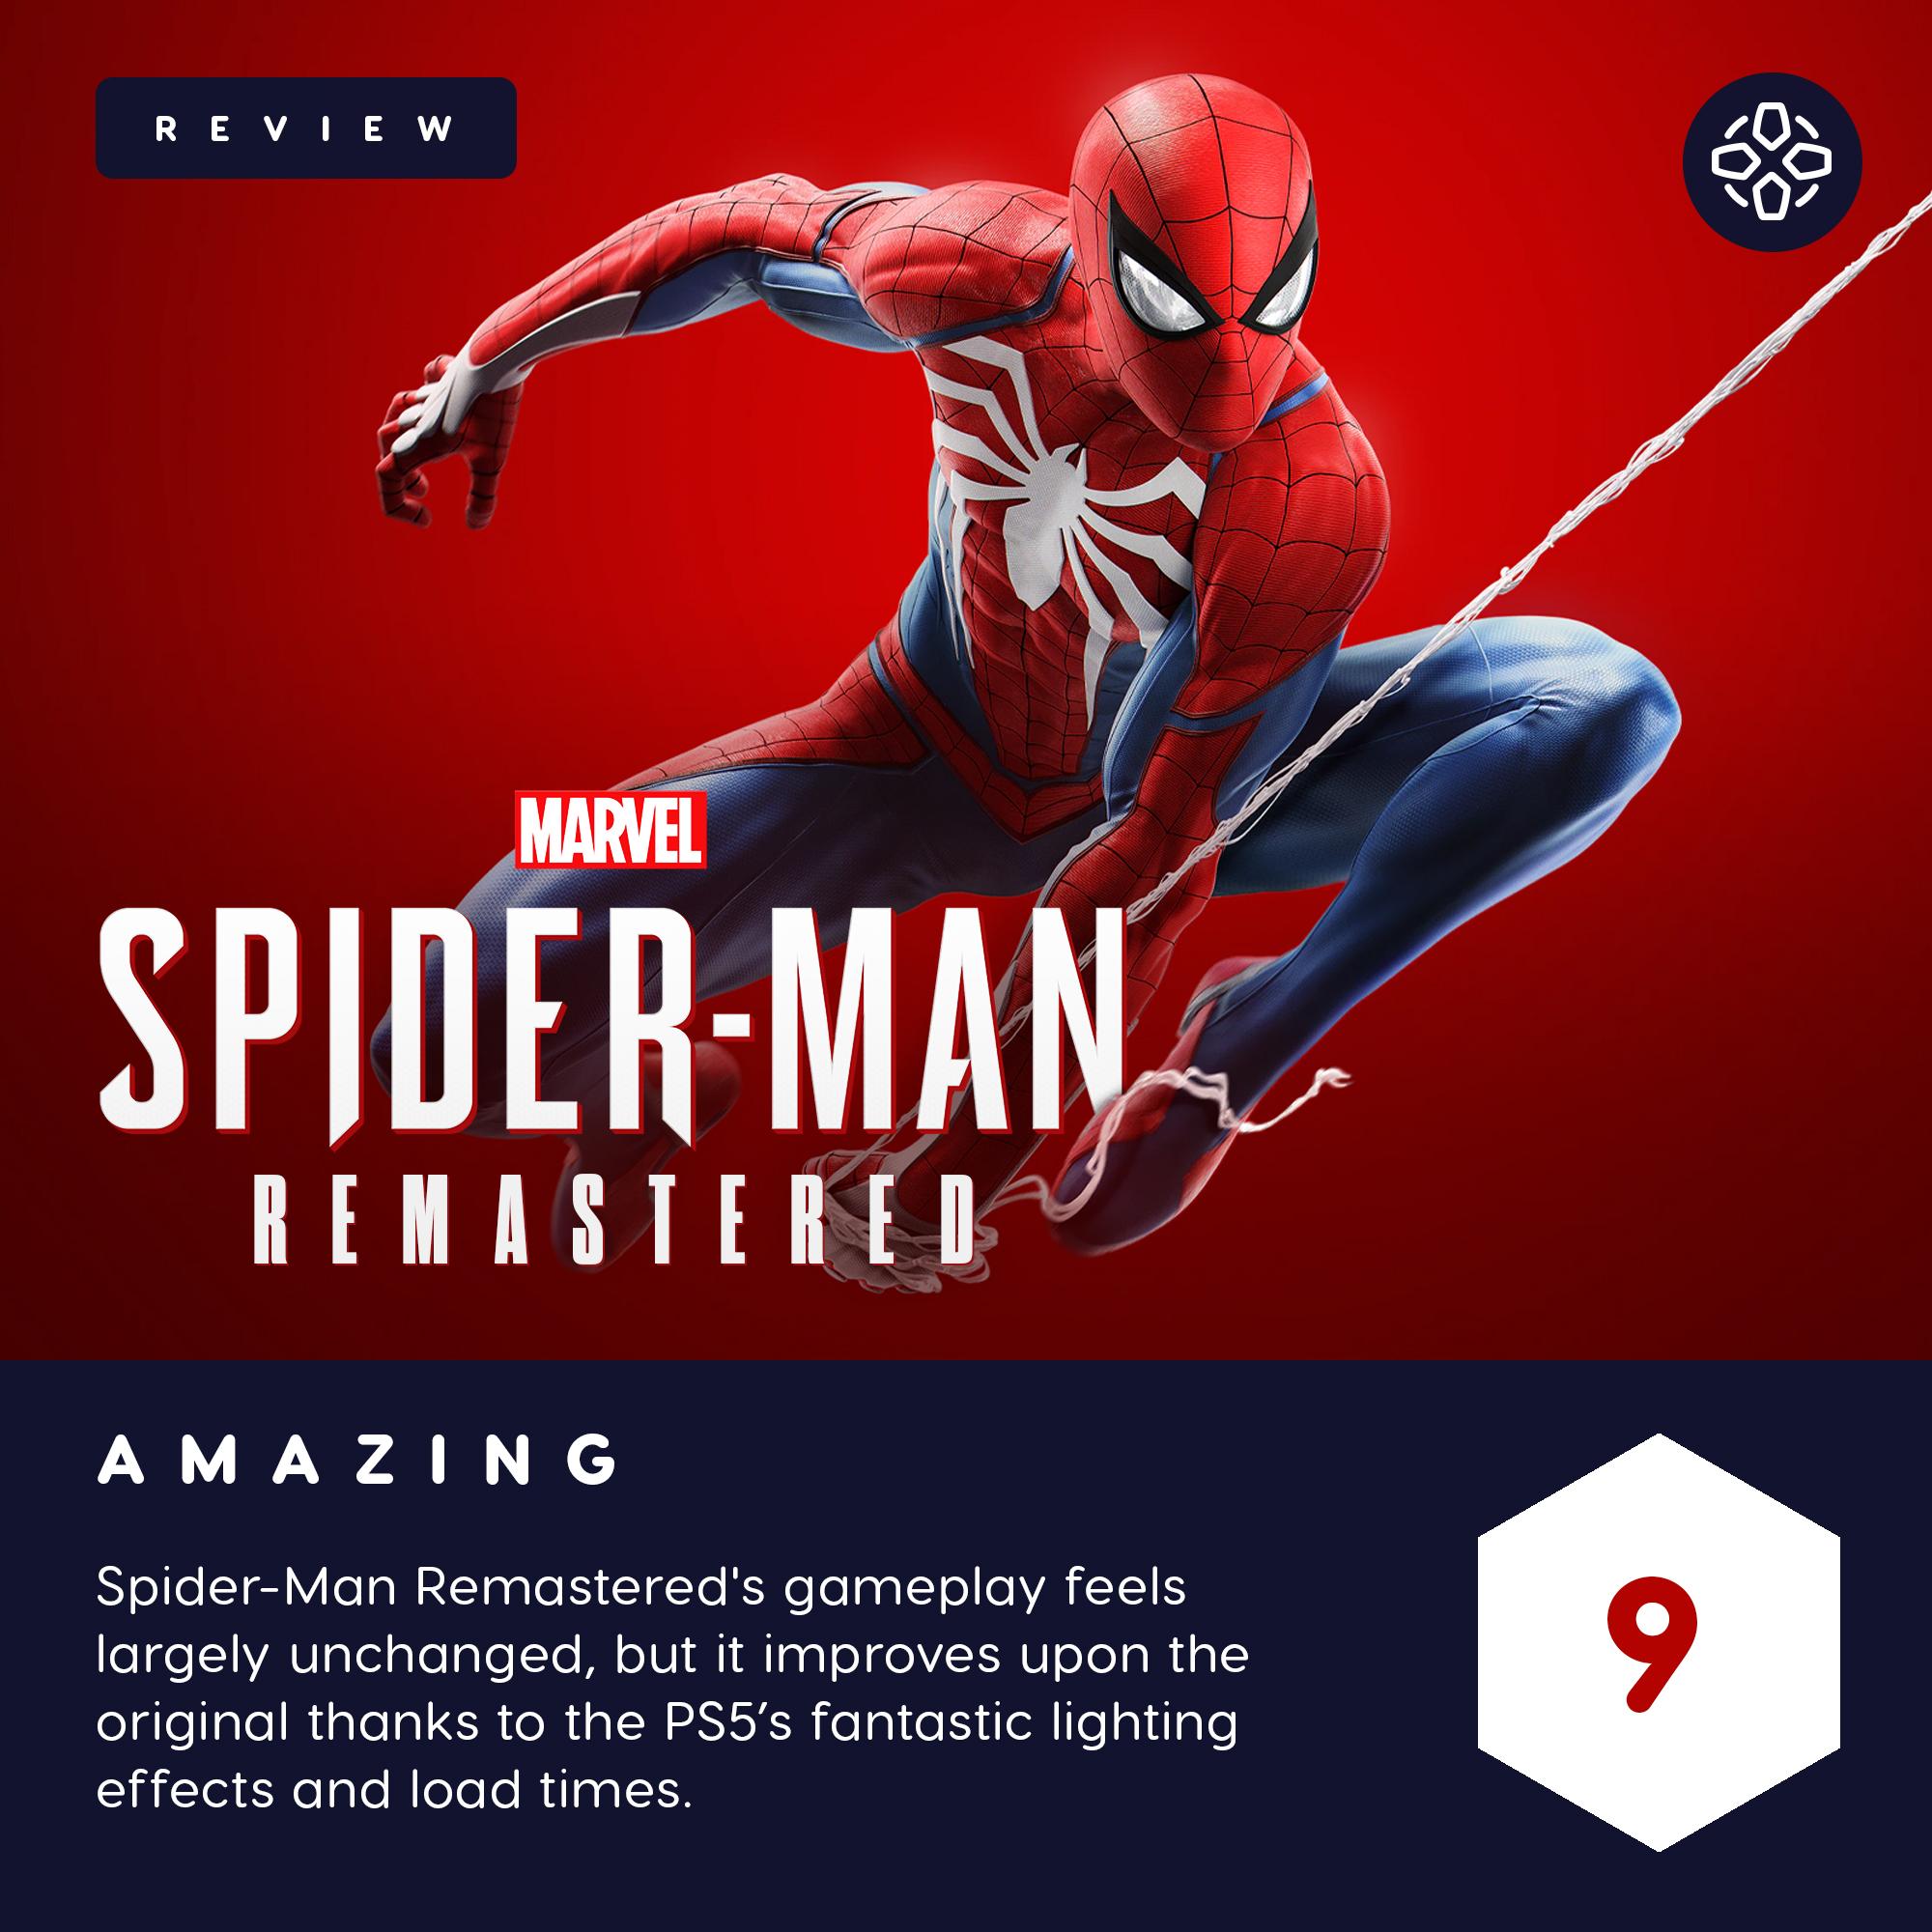 Twitter 上的IGN："Marvel's Spider-Man Remastered combines the spectacular main adventure all its additional content for a visual treat to kick off PS5 era. Our review: https://t.co/Gr8kv3782T https://t.co/vO9AkGE9zP" /